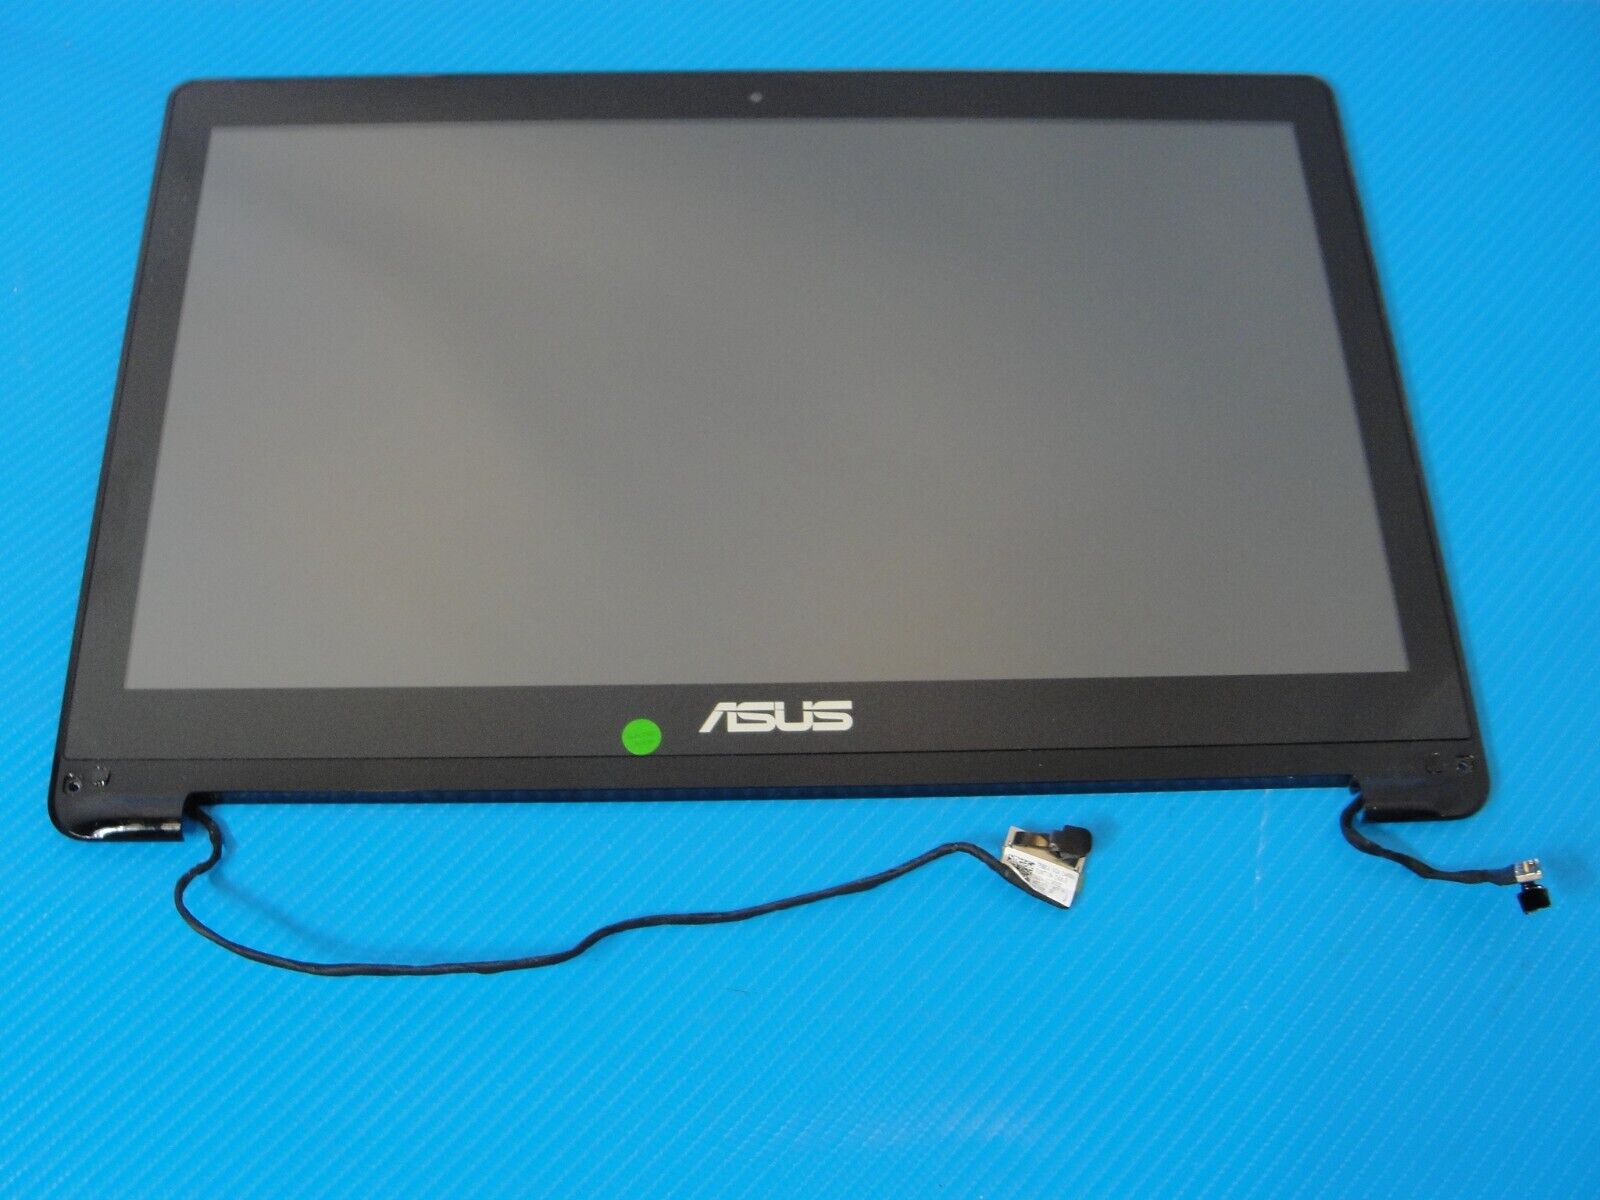 Asus TP500LA-US51T 15.6" Glossy FHD LCD Touch Screen B156HTN03.6 14005-01290200